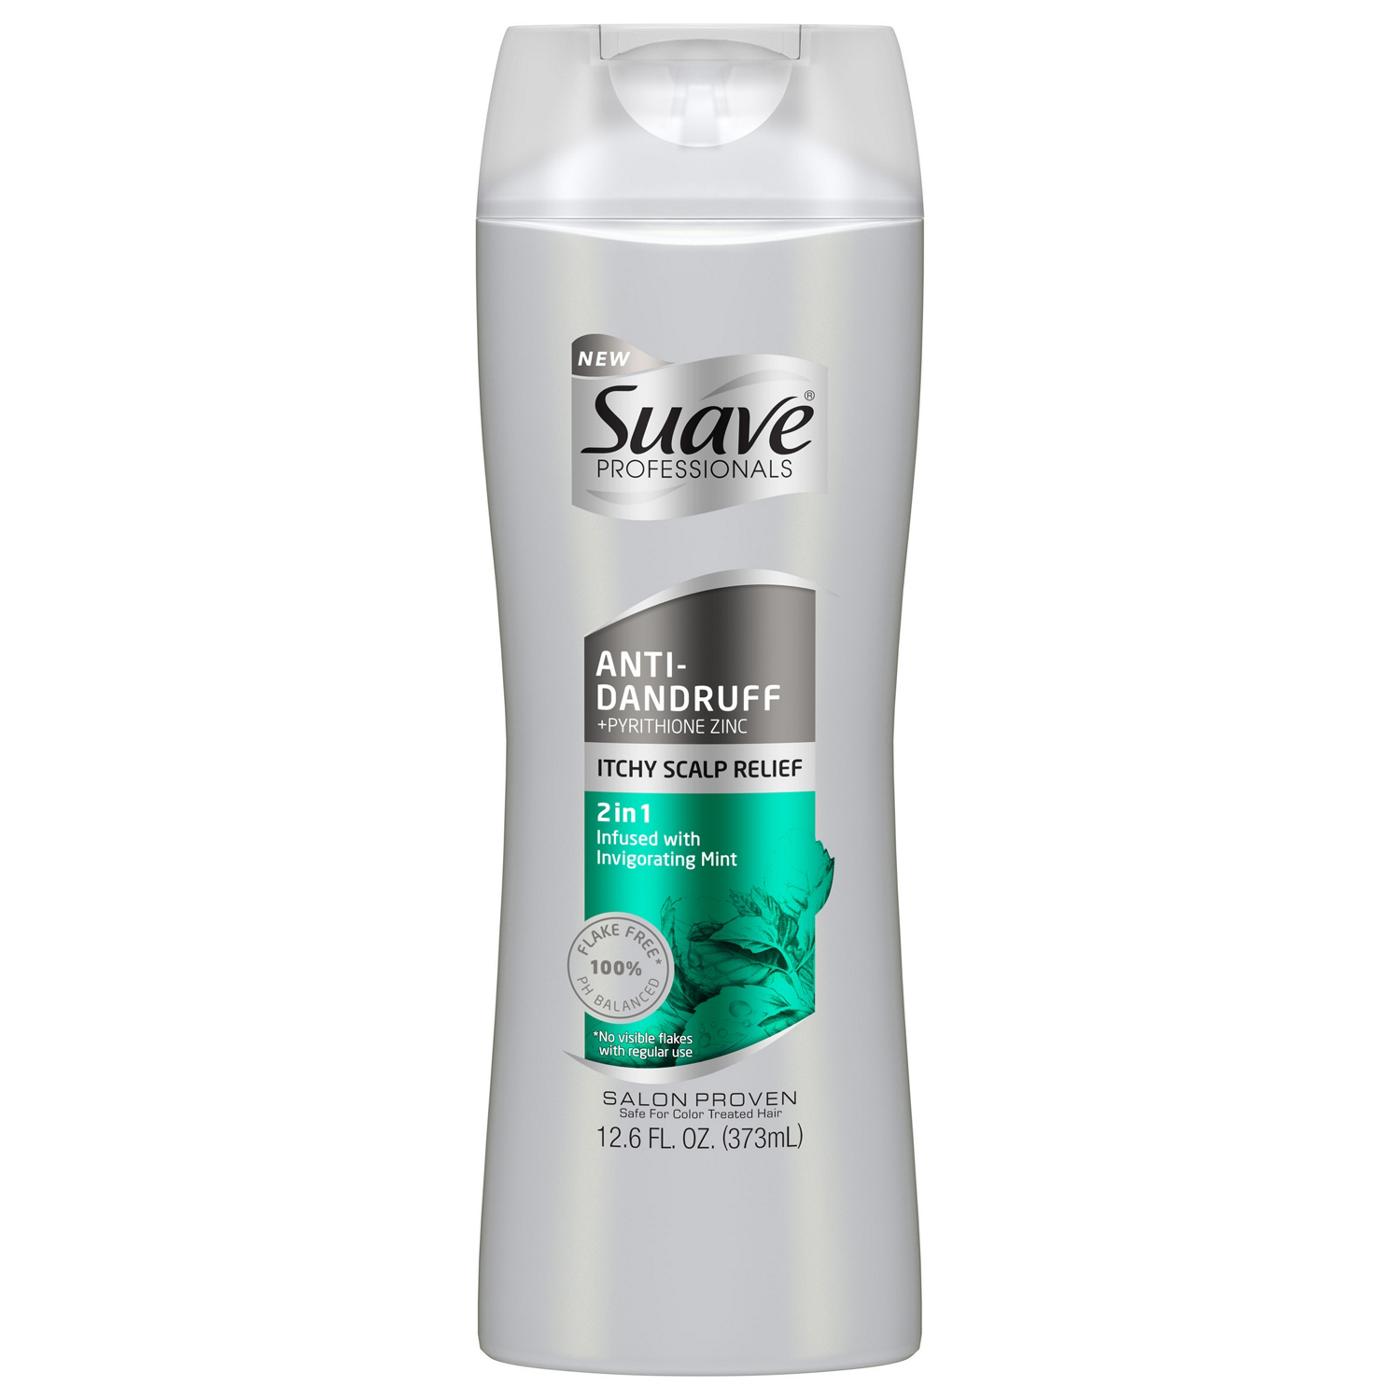 Suave Professionals Itchy Scalp Anti Dandruff 2 in 1 Shampoo and Conditioner; image 1 of 4